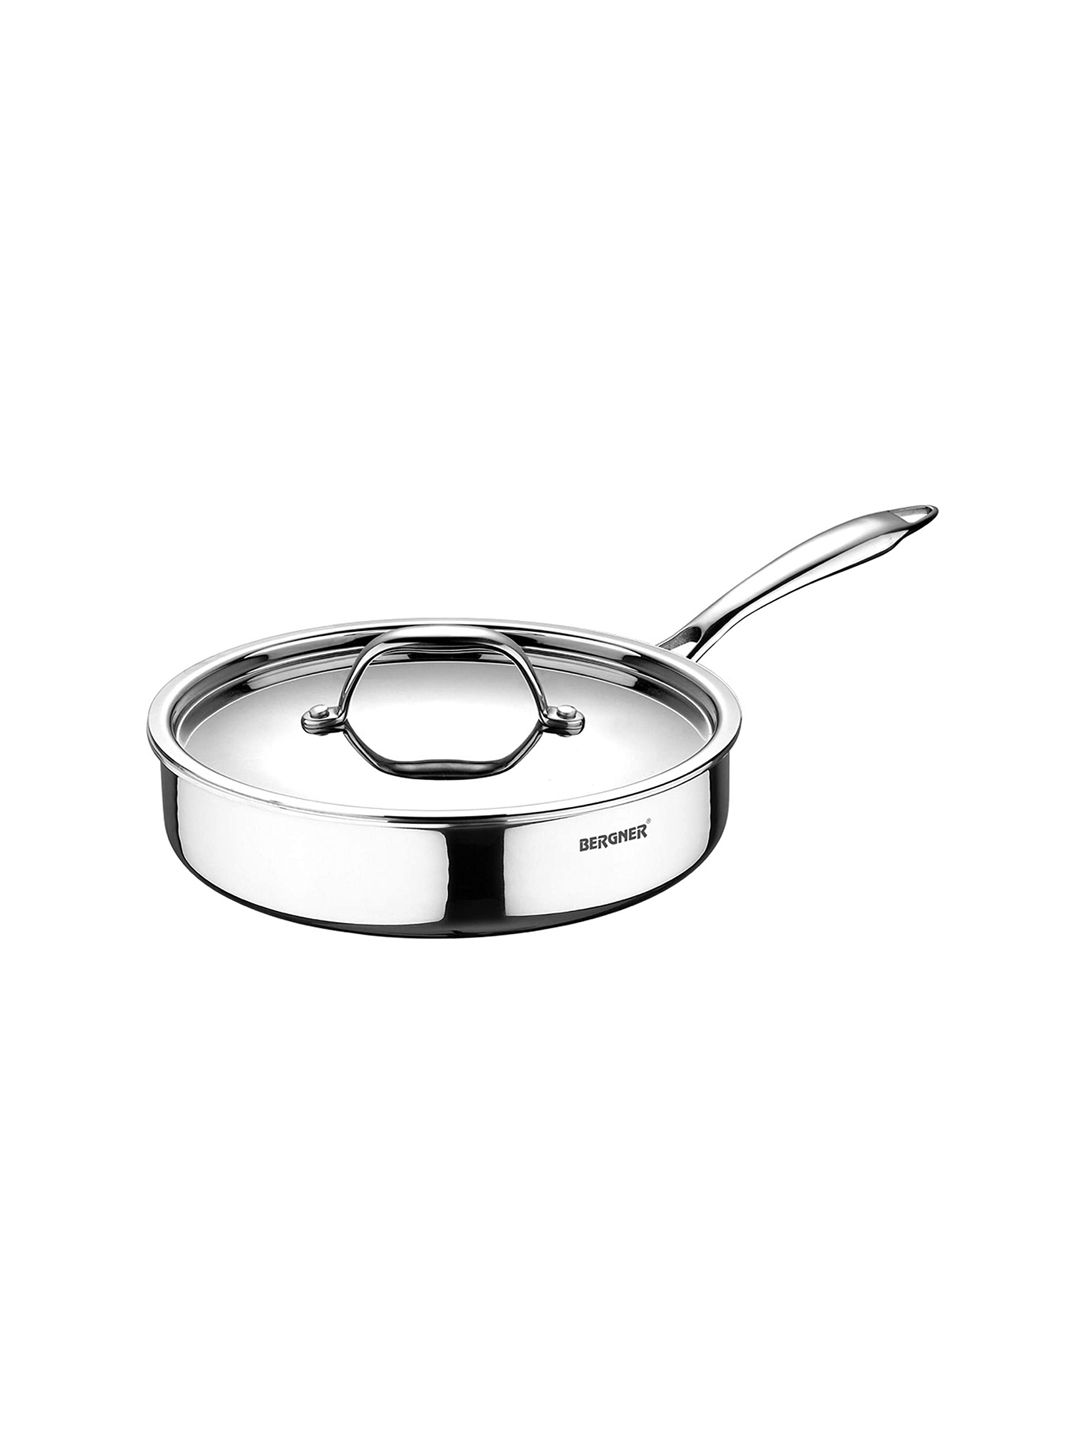 BERGNER Silver-Toned Solid Tri-Ply Stainless Steel Saute pan With Lid Price in India